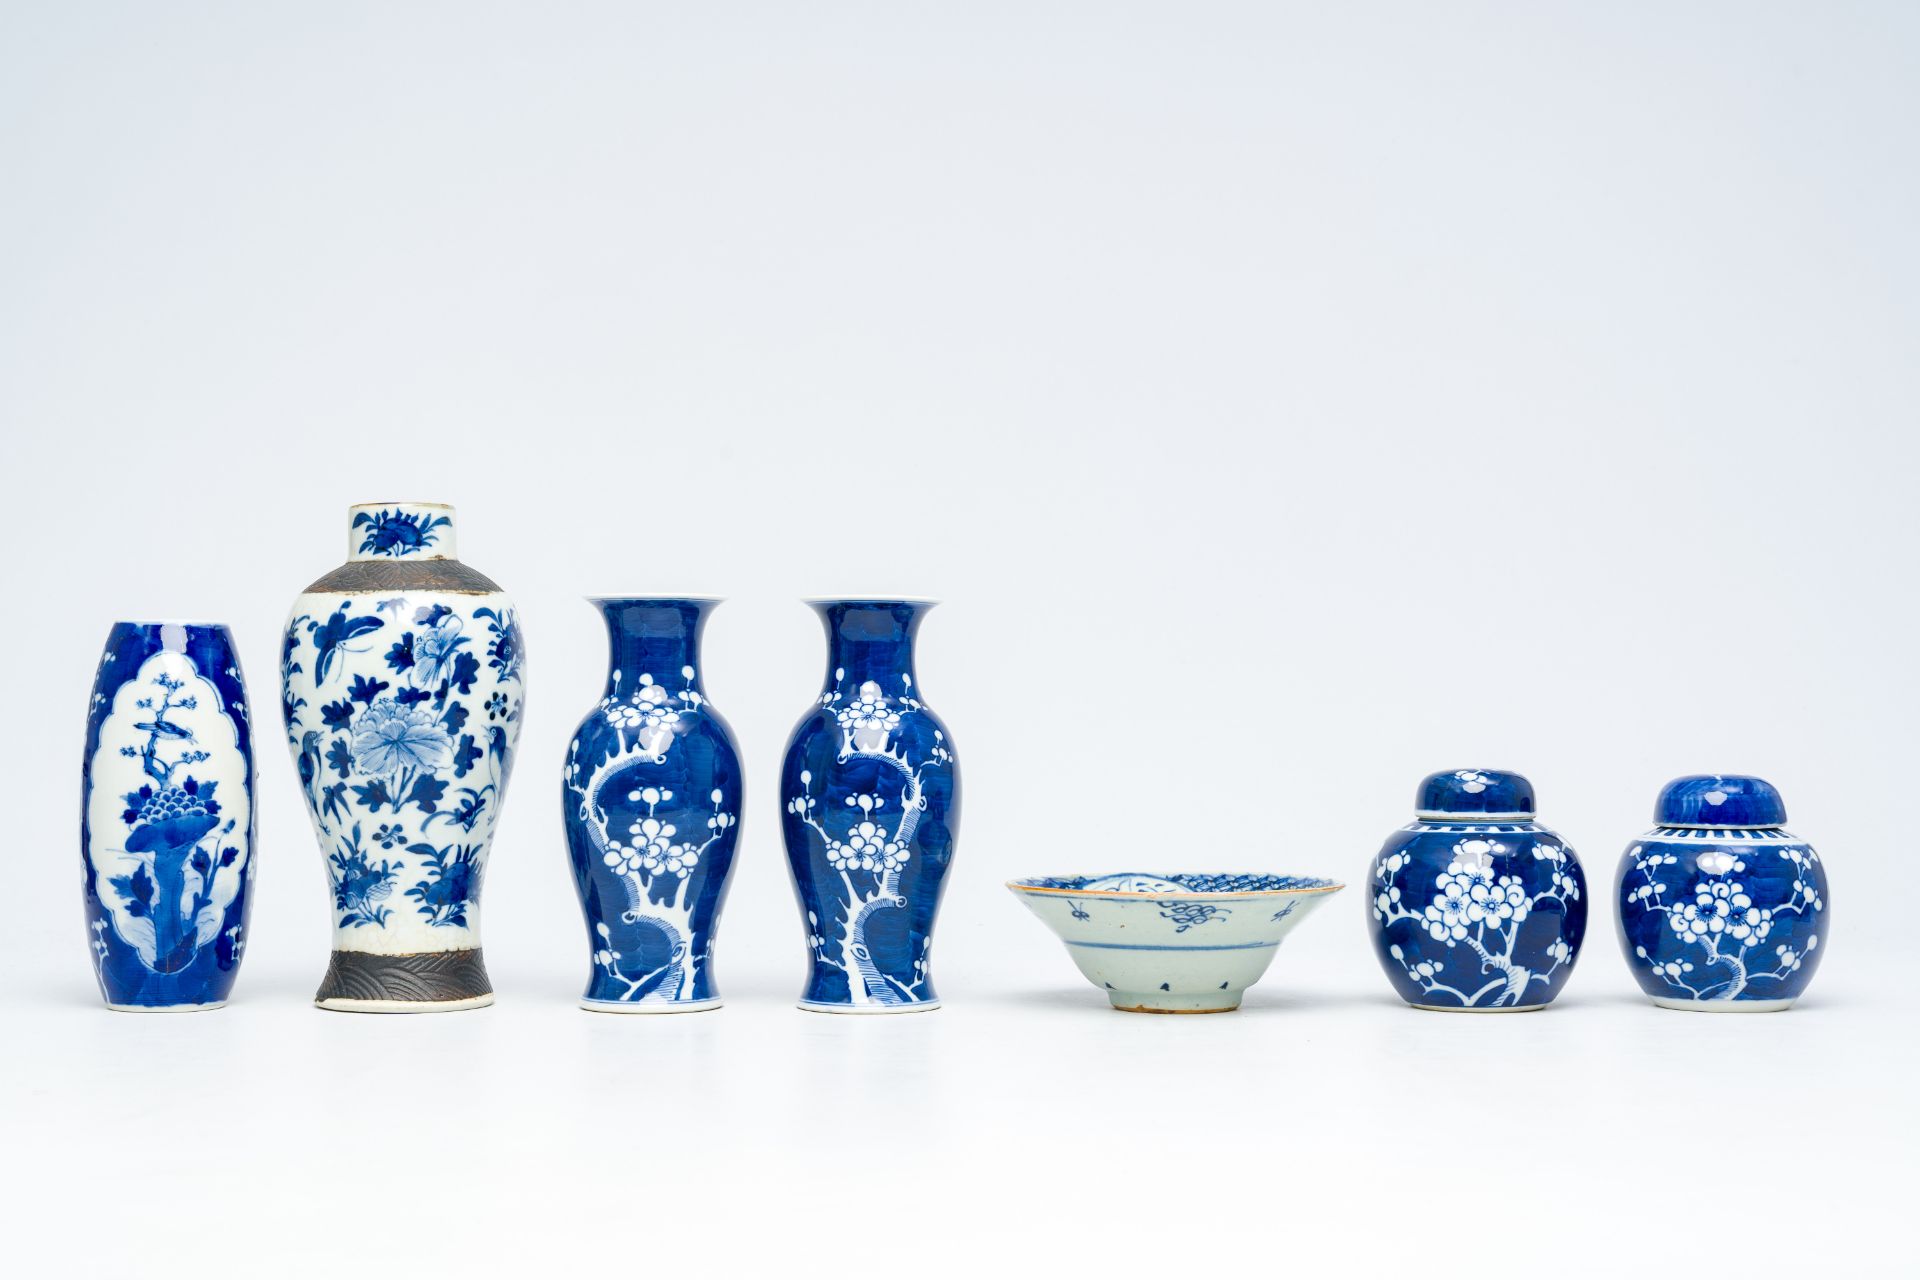 A varied collection of Chinese blue and white porcelain with floral design, 19th/20th C. - Image 4 of 18